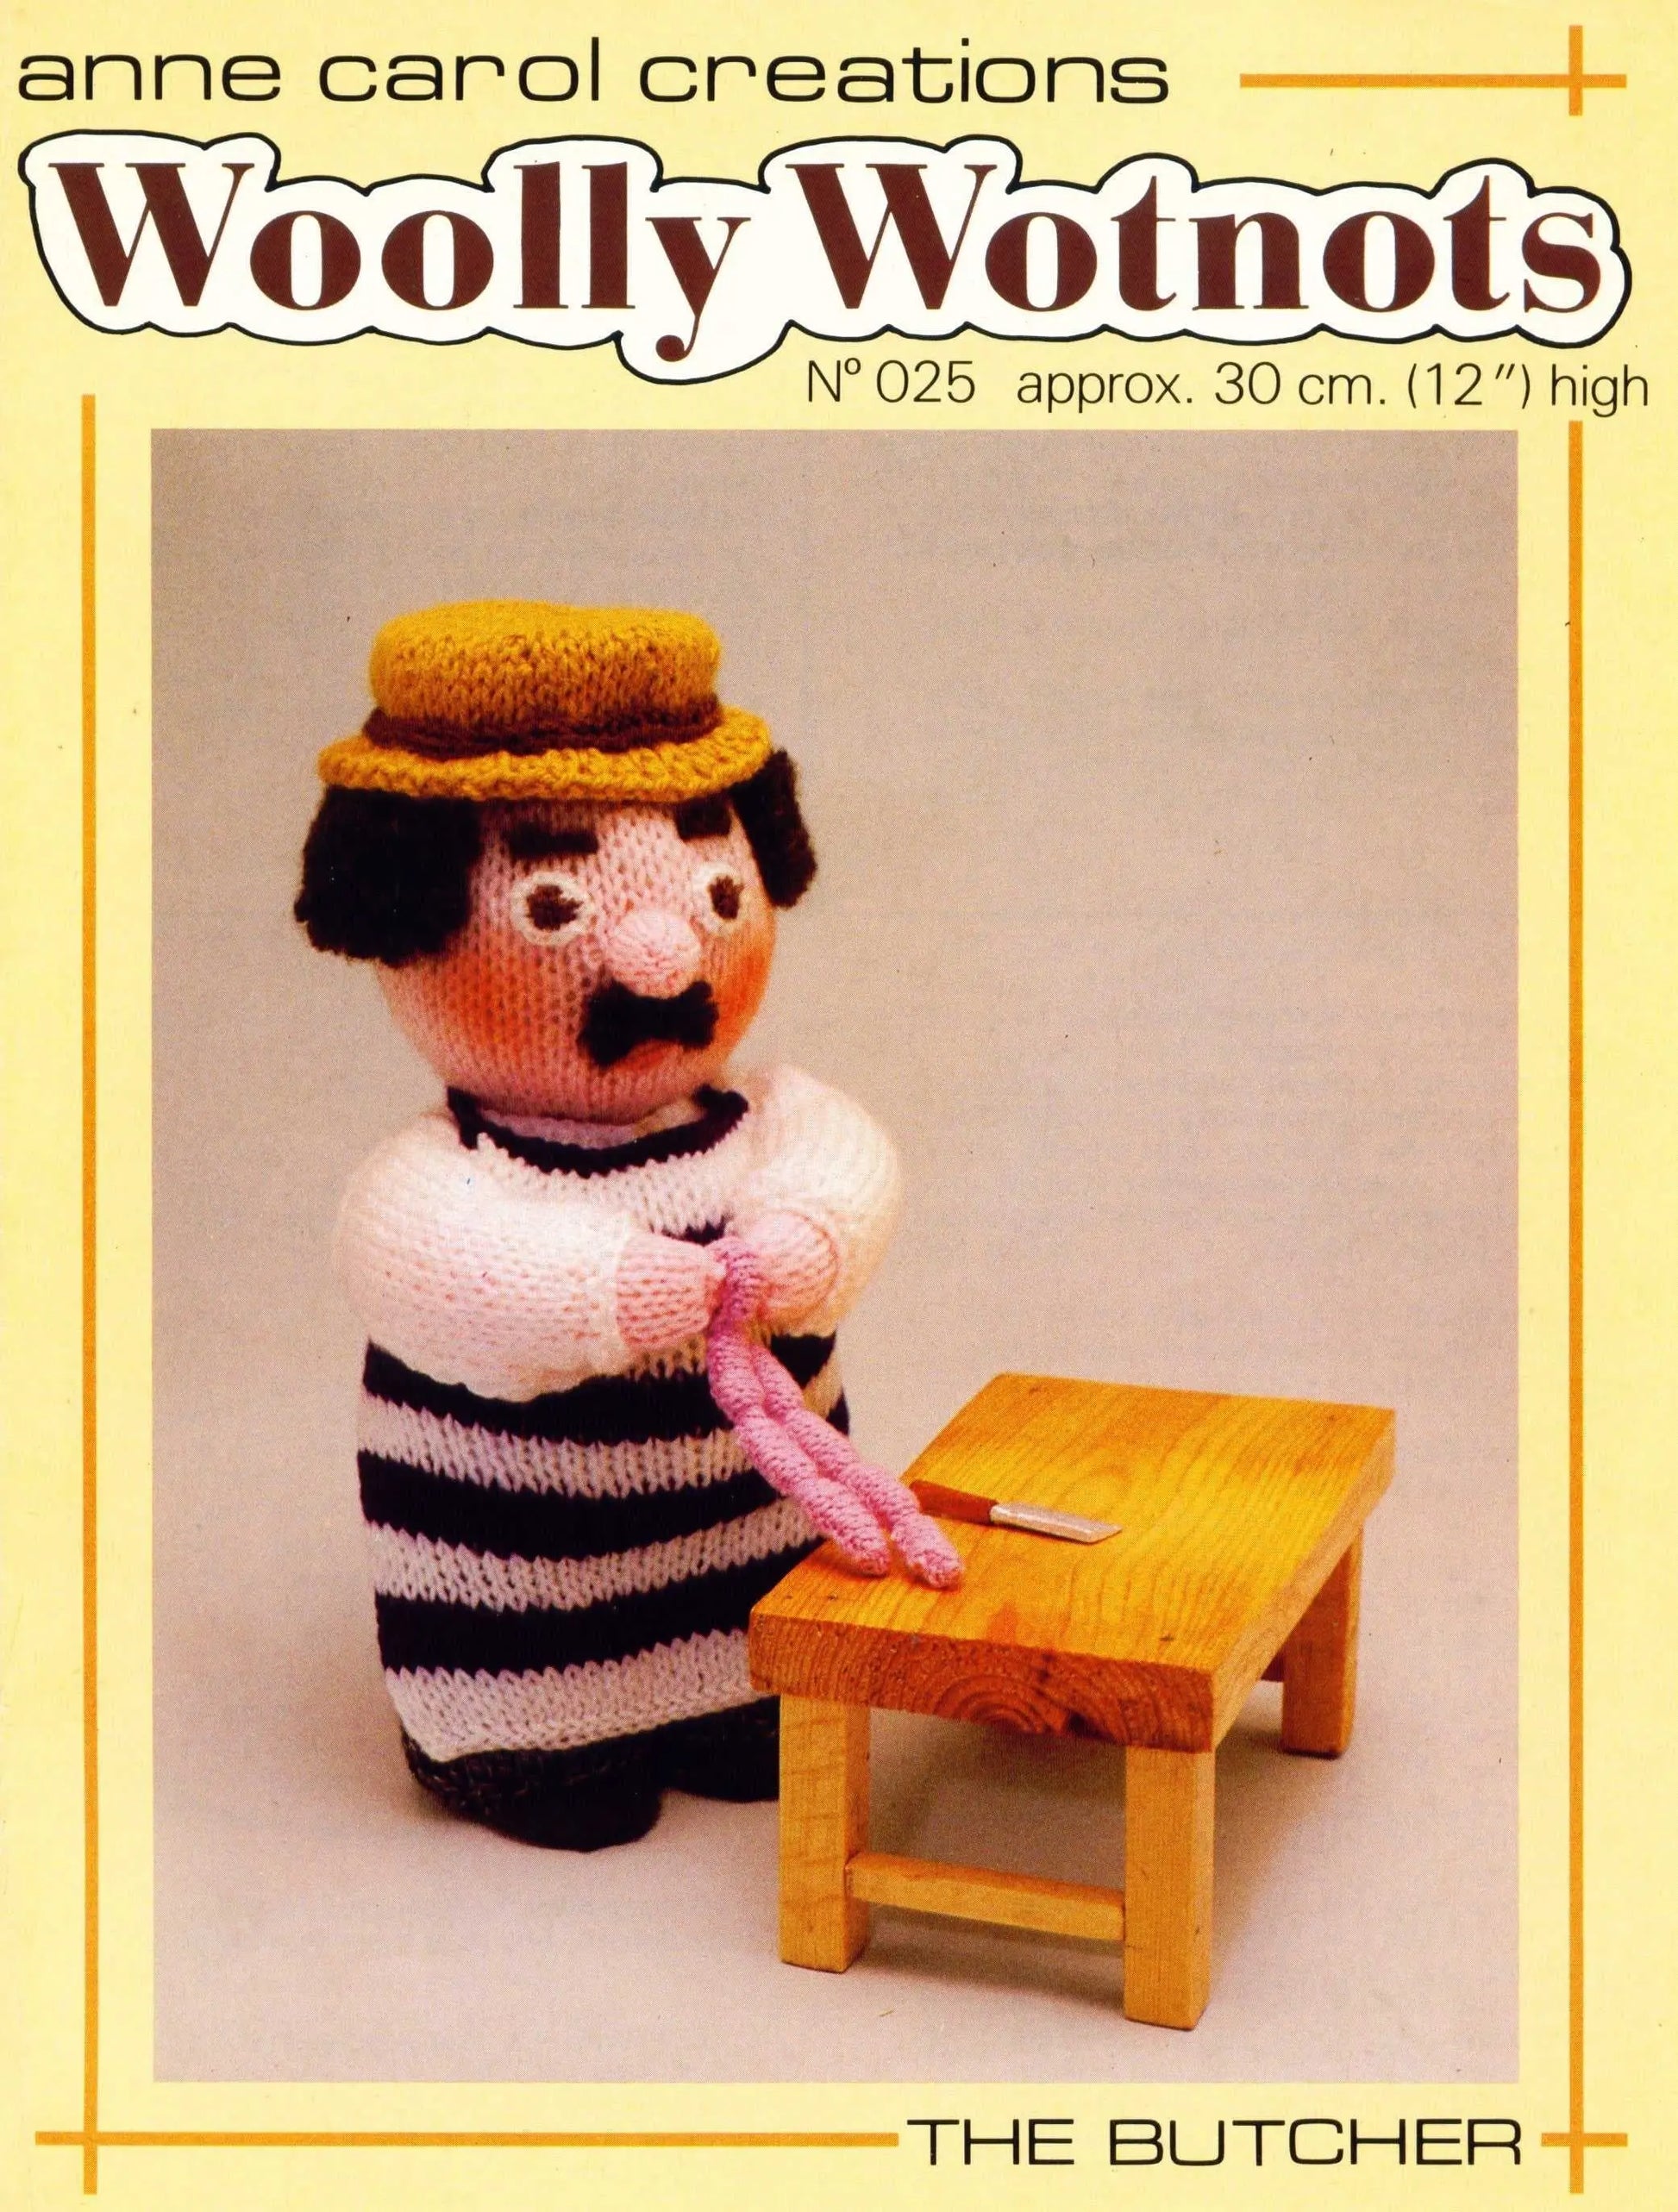  Woolly Wotnots Butcher Knitting Pattern by Cross Stitch Chart Heaven sold by Free Spirit Accessories